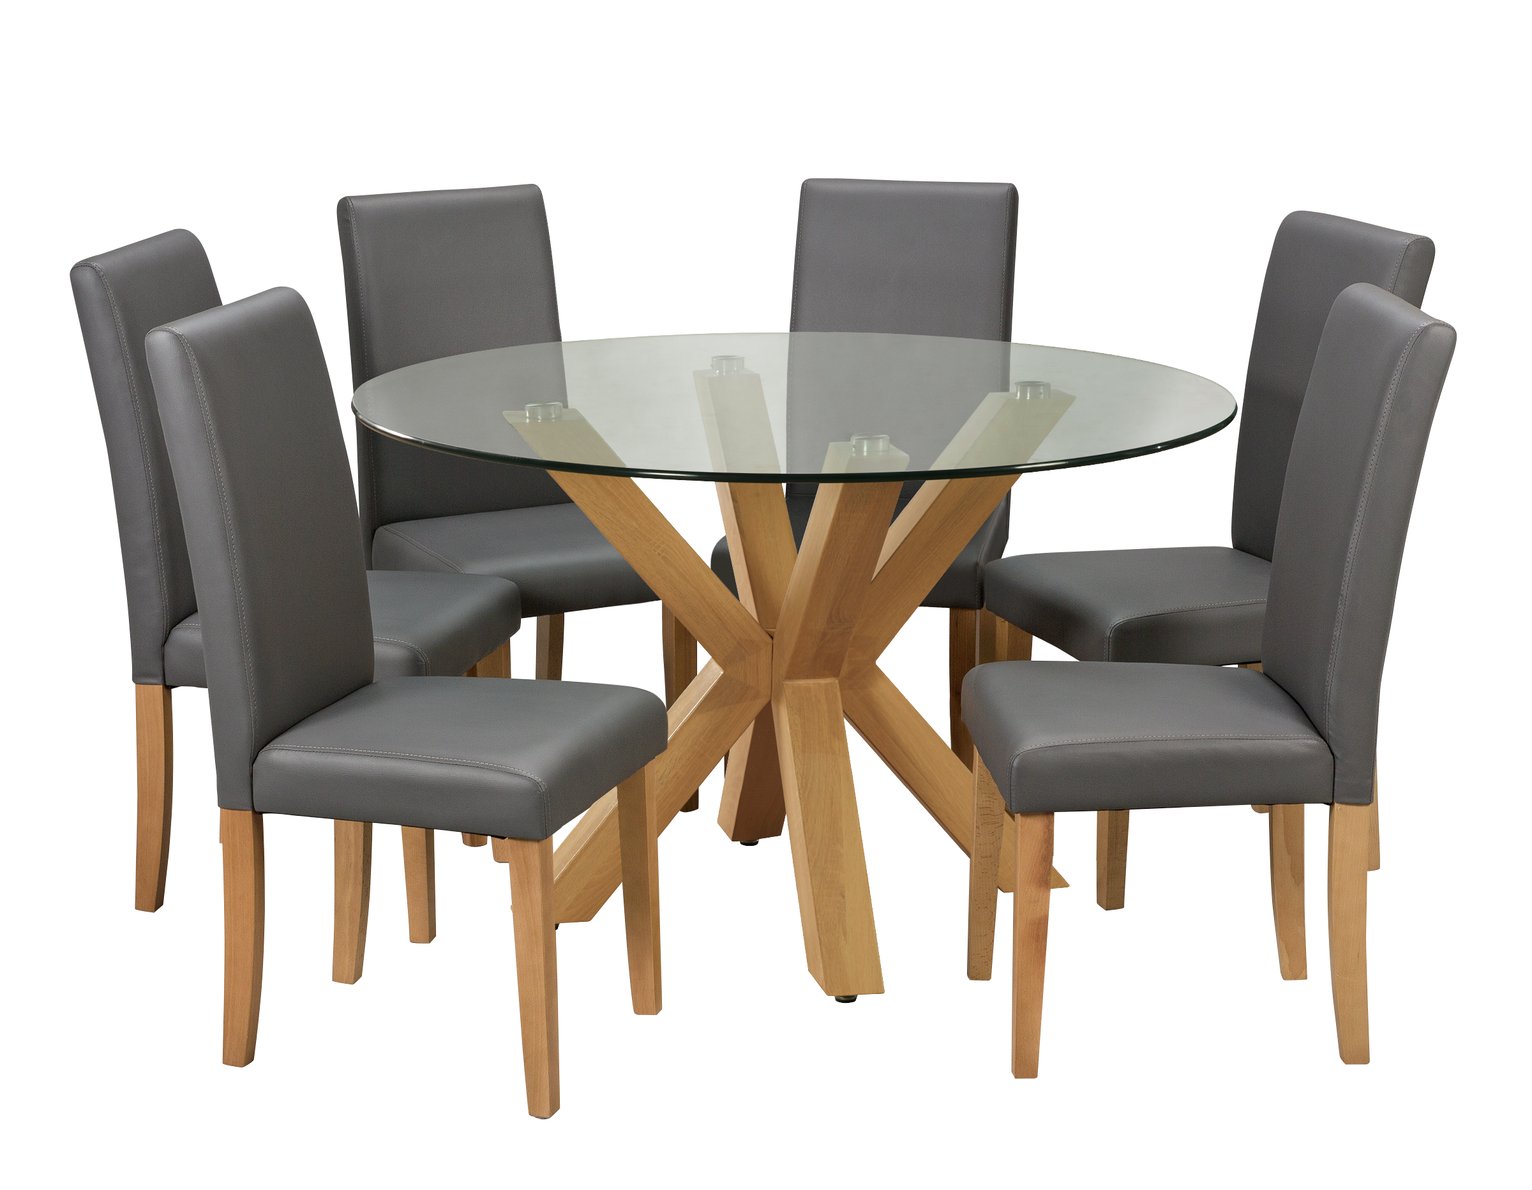 Argos Home Alden Glass Dining Table & 6 Charcoal Chairs